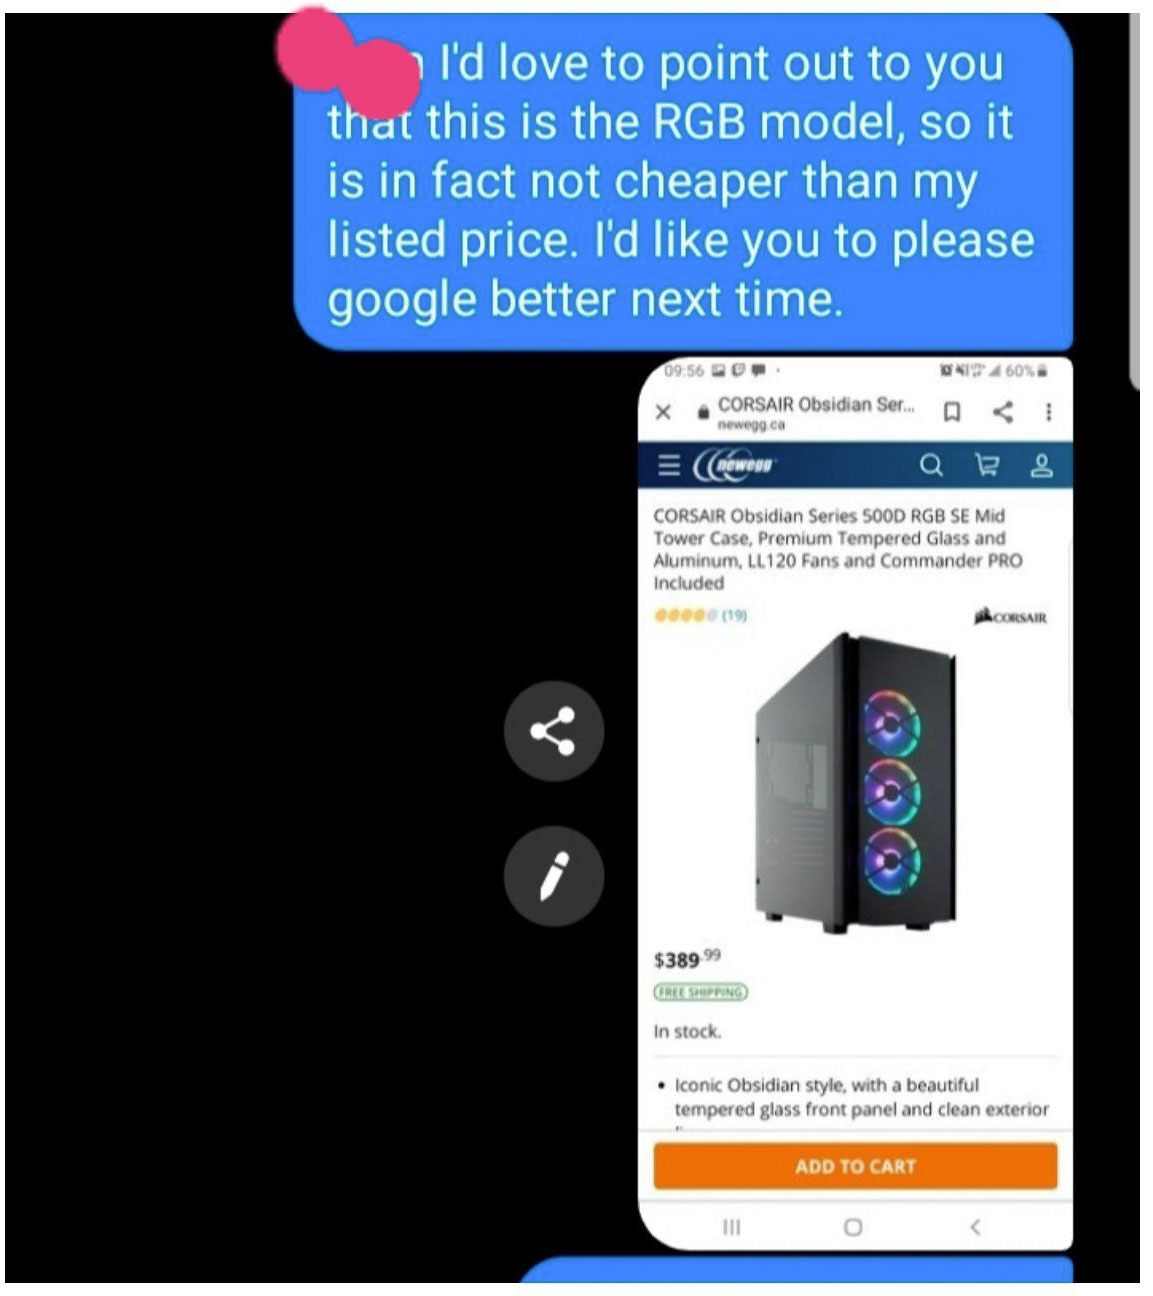 multimedia - I'd love to point out to you that this is the Rgb model, so it is in fact not cheaper than my listed price. I'd you to please google better next time. 460% Bd X Corsair Obsidian Ser... 0 newegg ca E nowego Q R 8 Corsair Obsidian Series 500D R